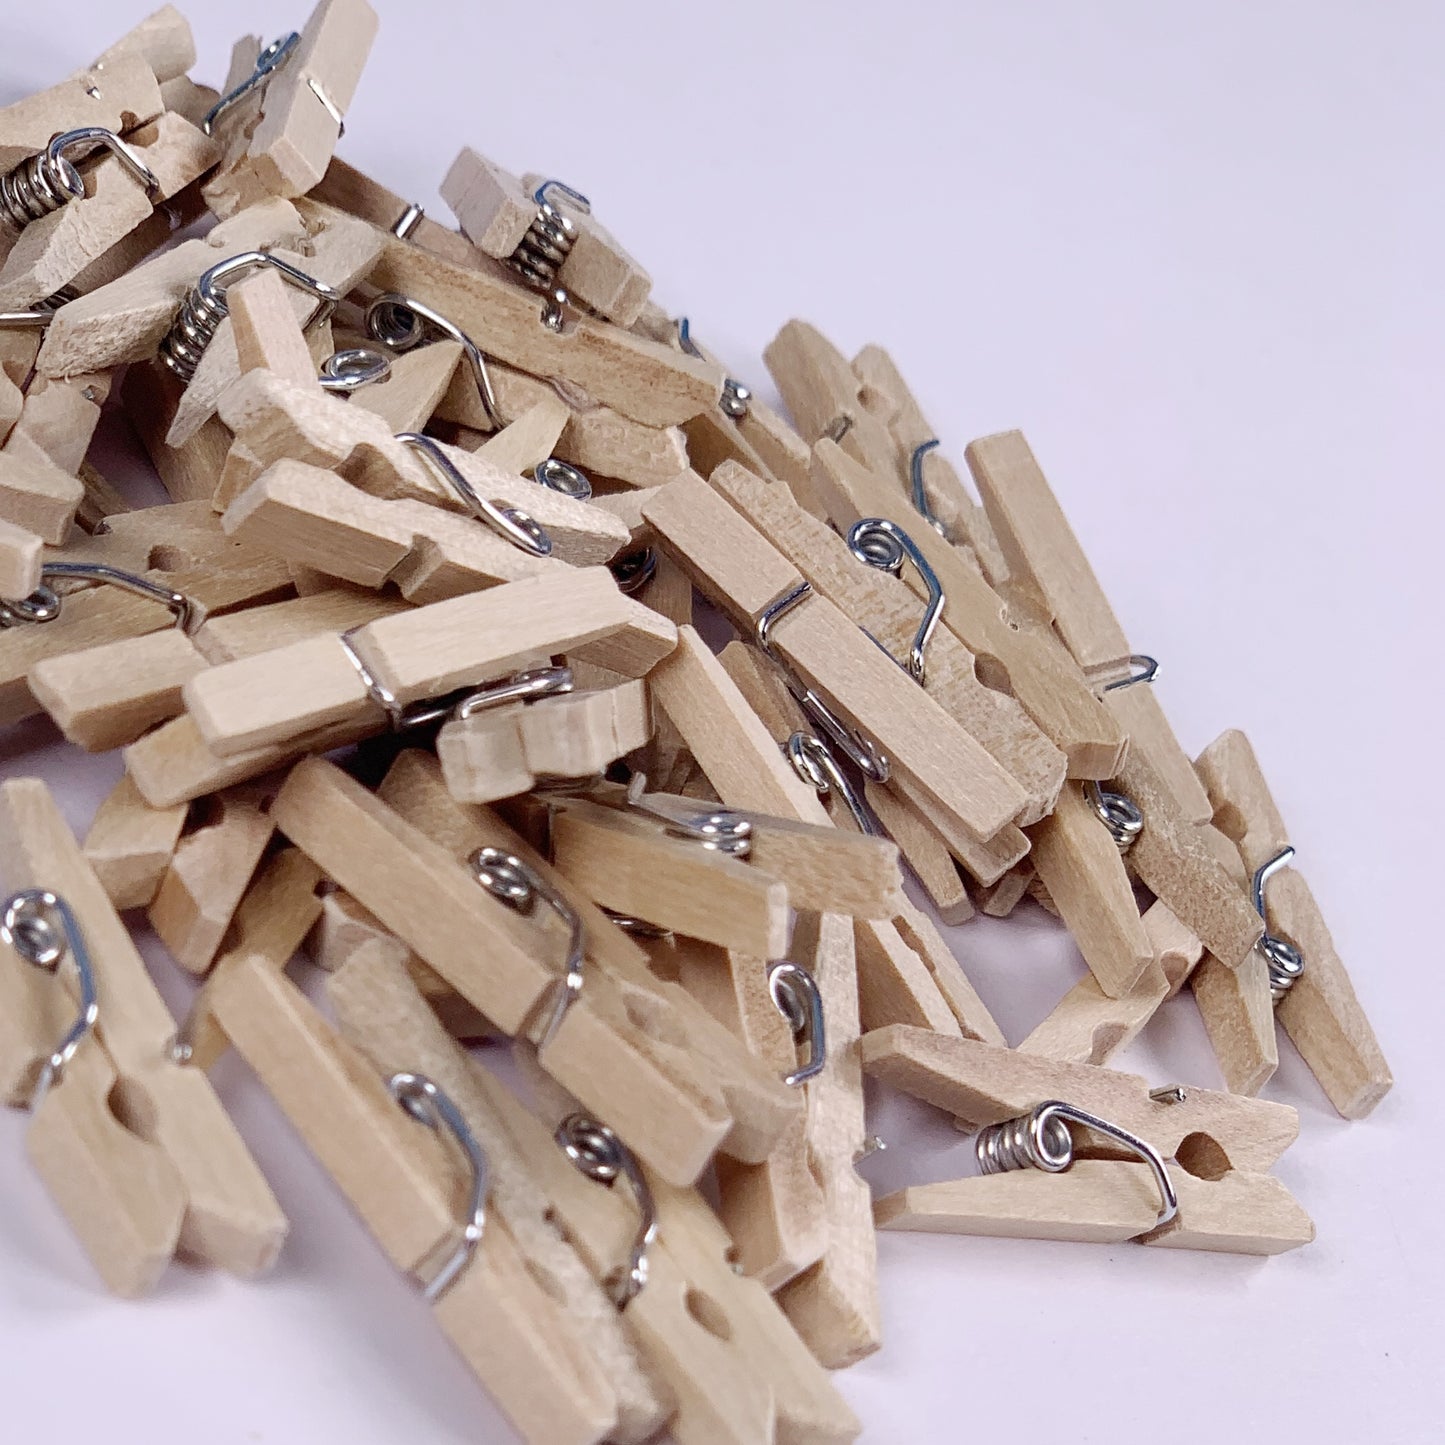 TINY CLOTHES PEGS